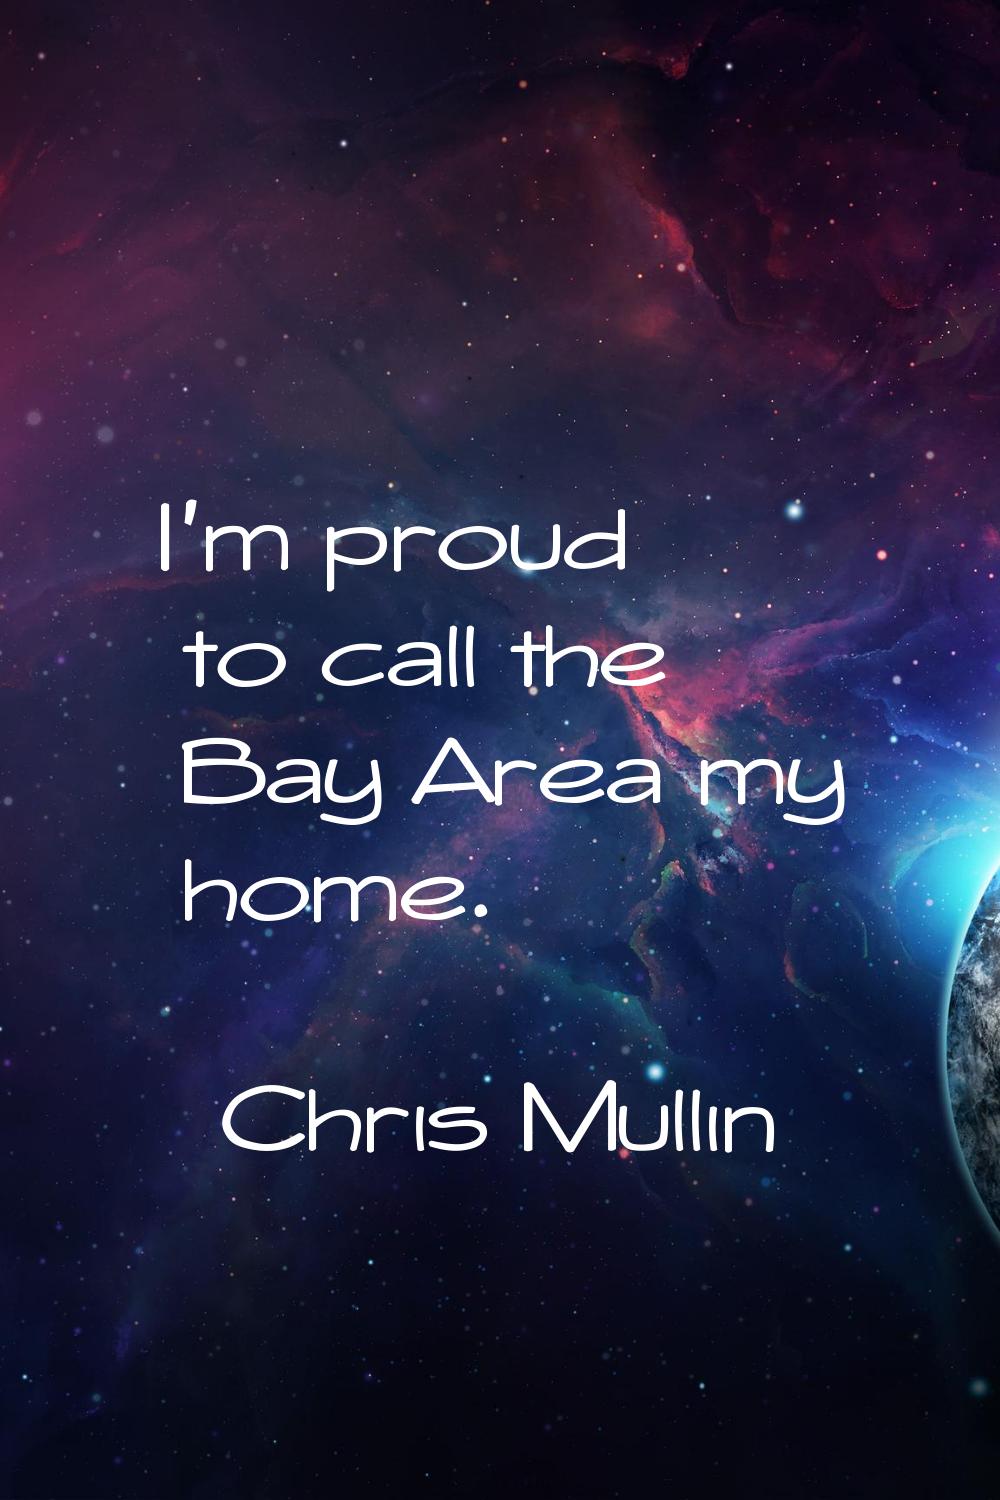 I'm proud to call the Bay Area my home.